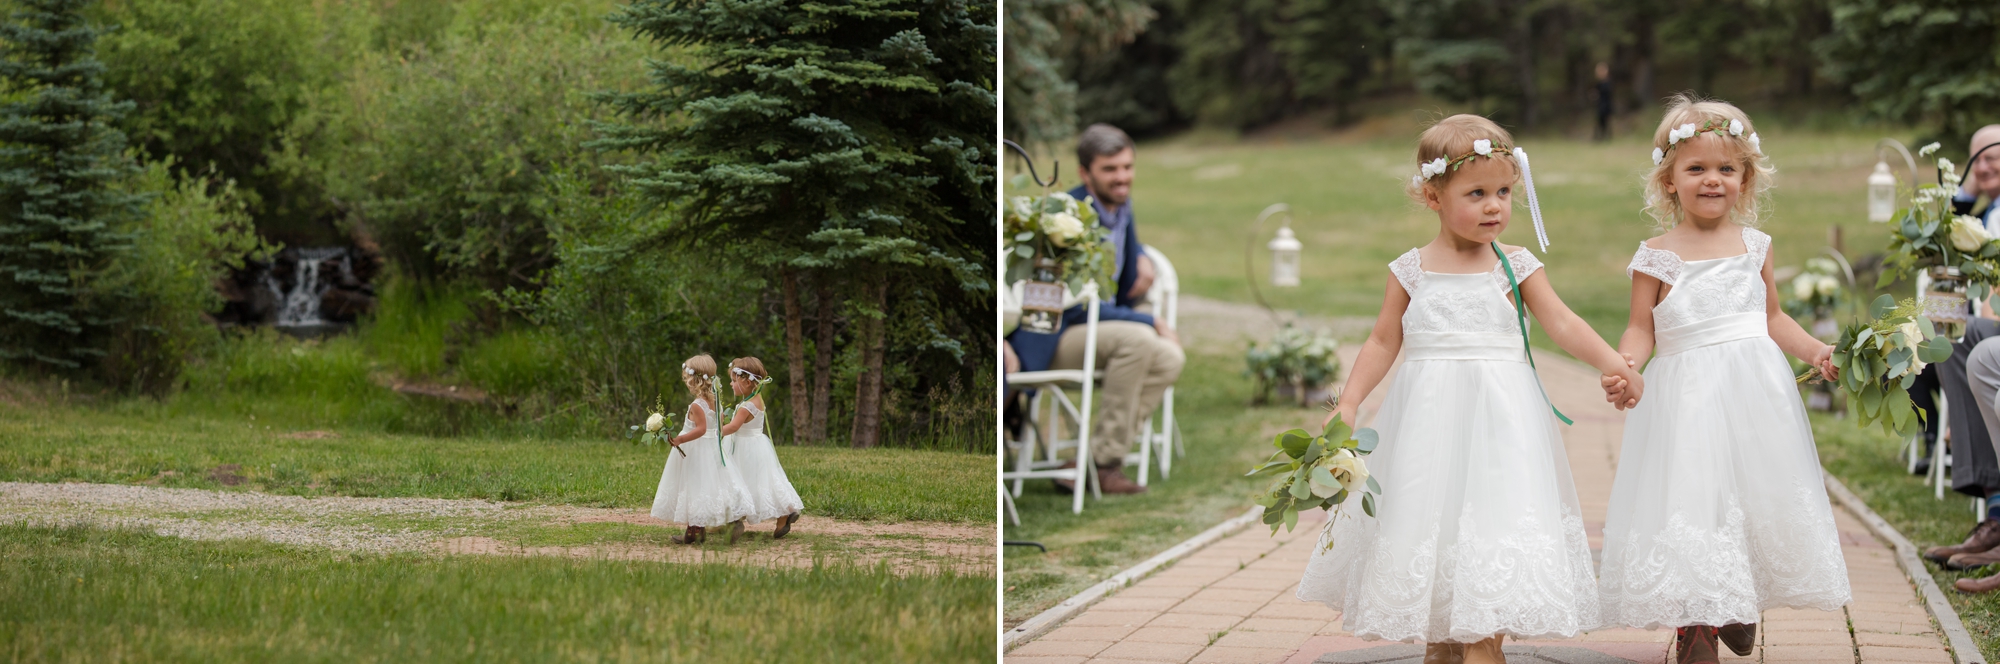 flower girls at outdoor ceremony